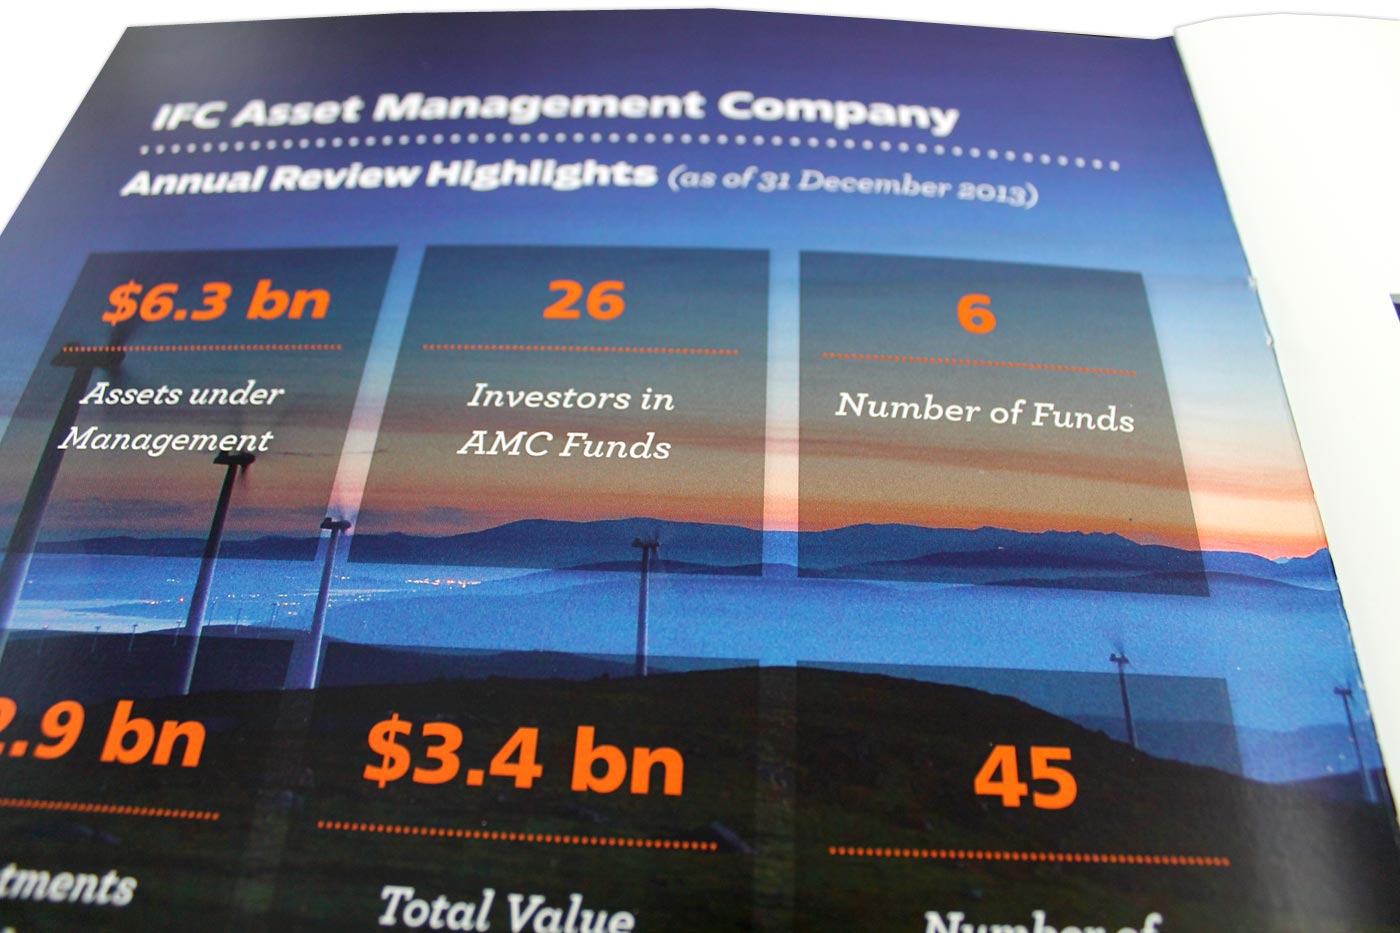 Asset Management Company - IFC - Annual Report